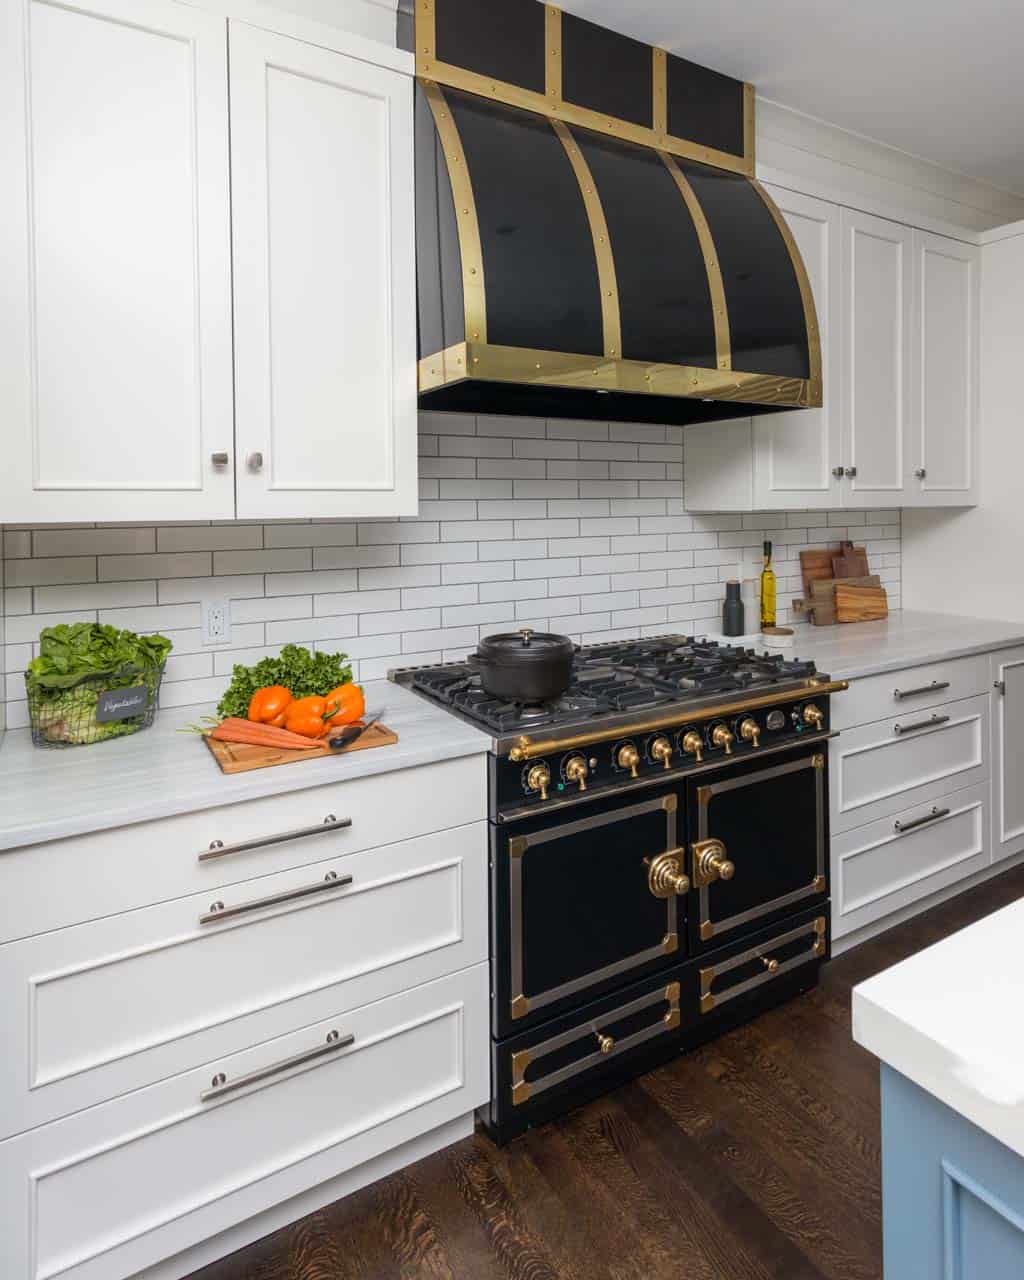 Classic kitchen features Bilotta custom cabinets, chrome and brass hardware and black and brass La Cornue range and hood.